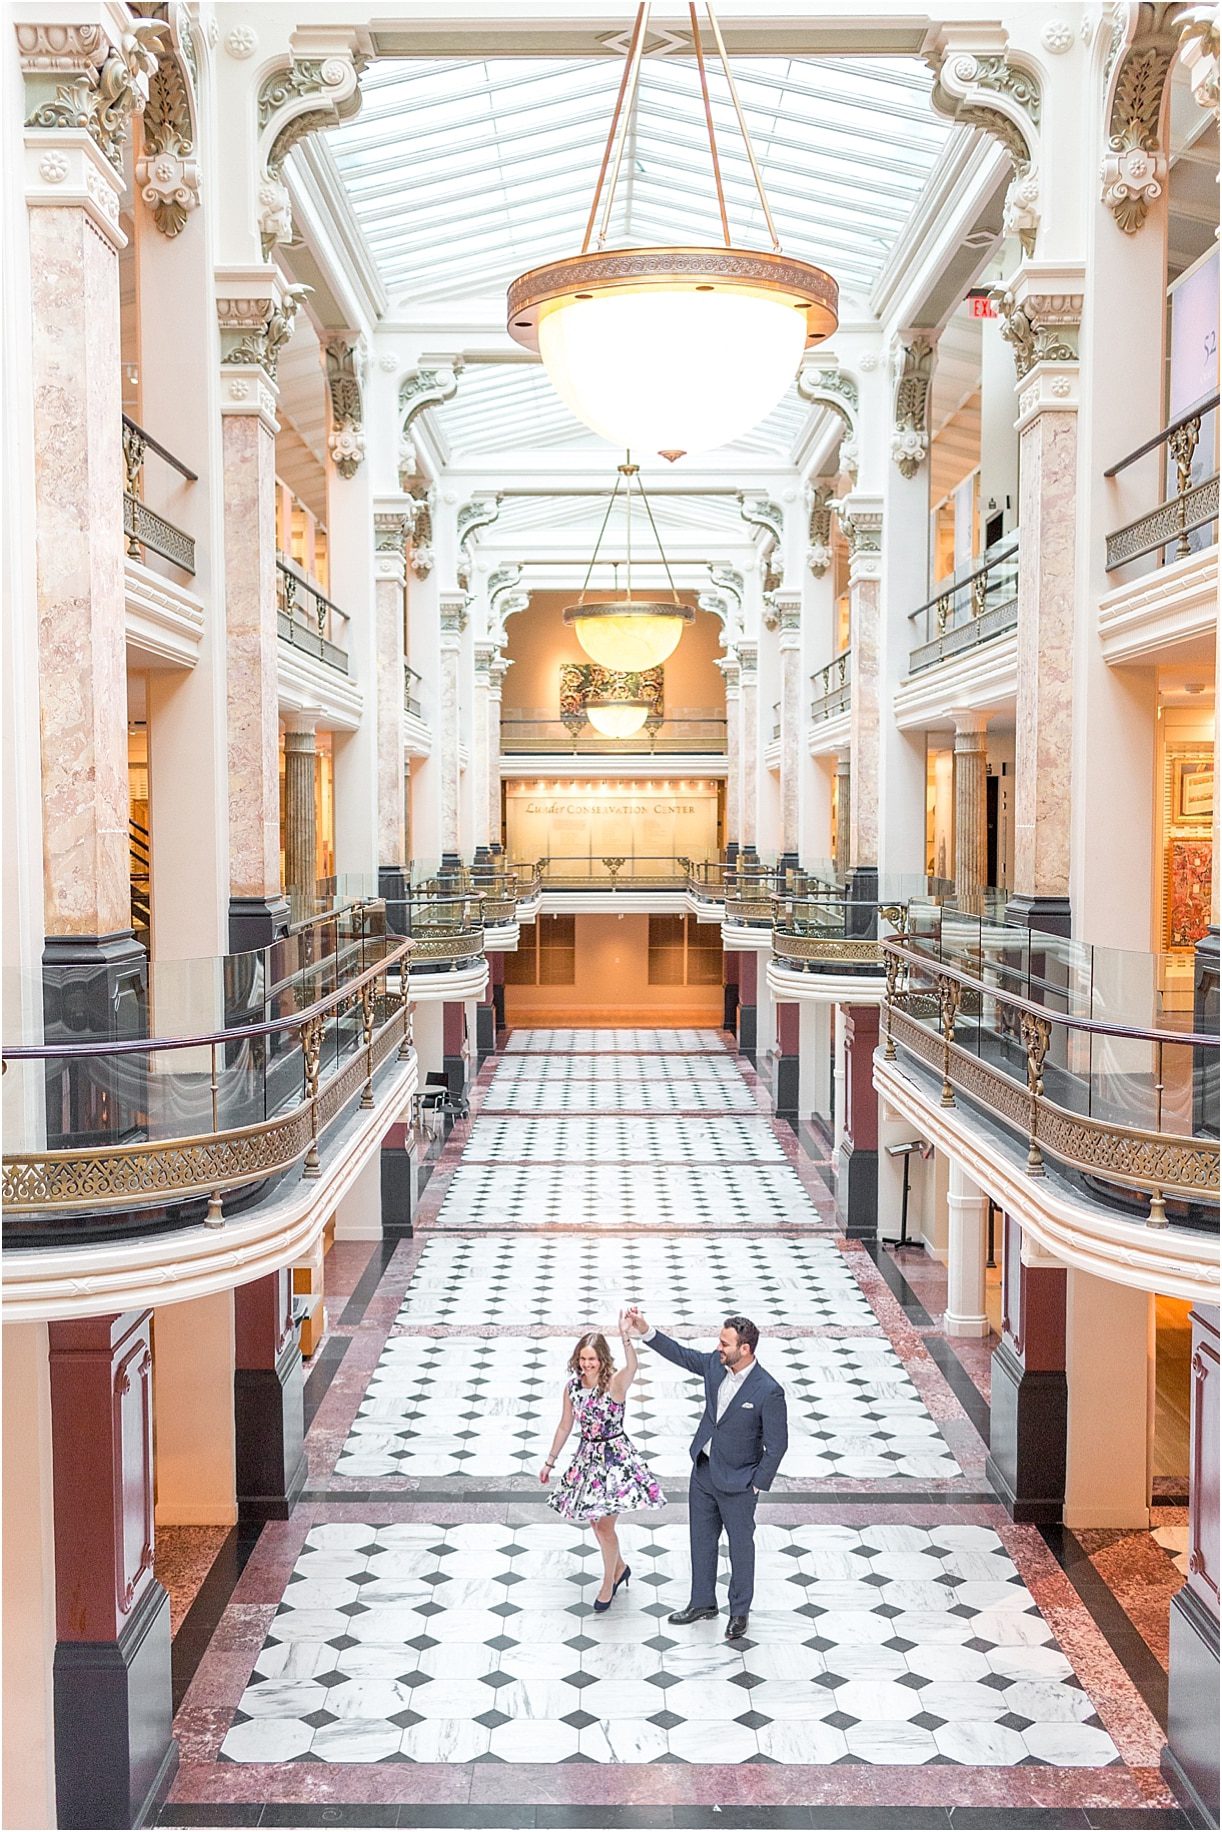 Washington DC National Portrait Gallery Engagement Session as seen on Hill City Bride Virginia Wedding Blog by Kir2ben